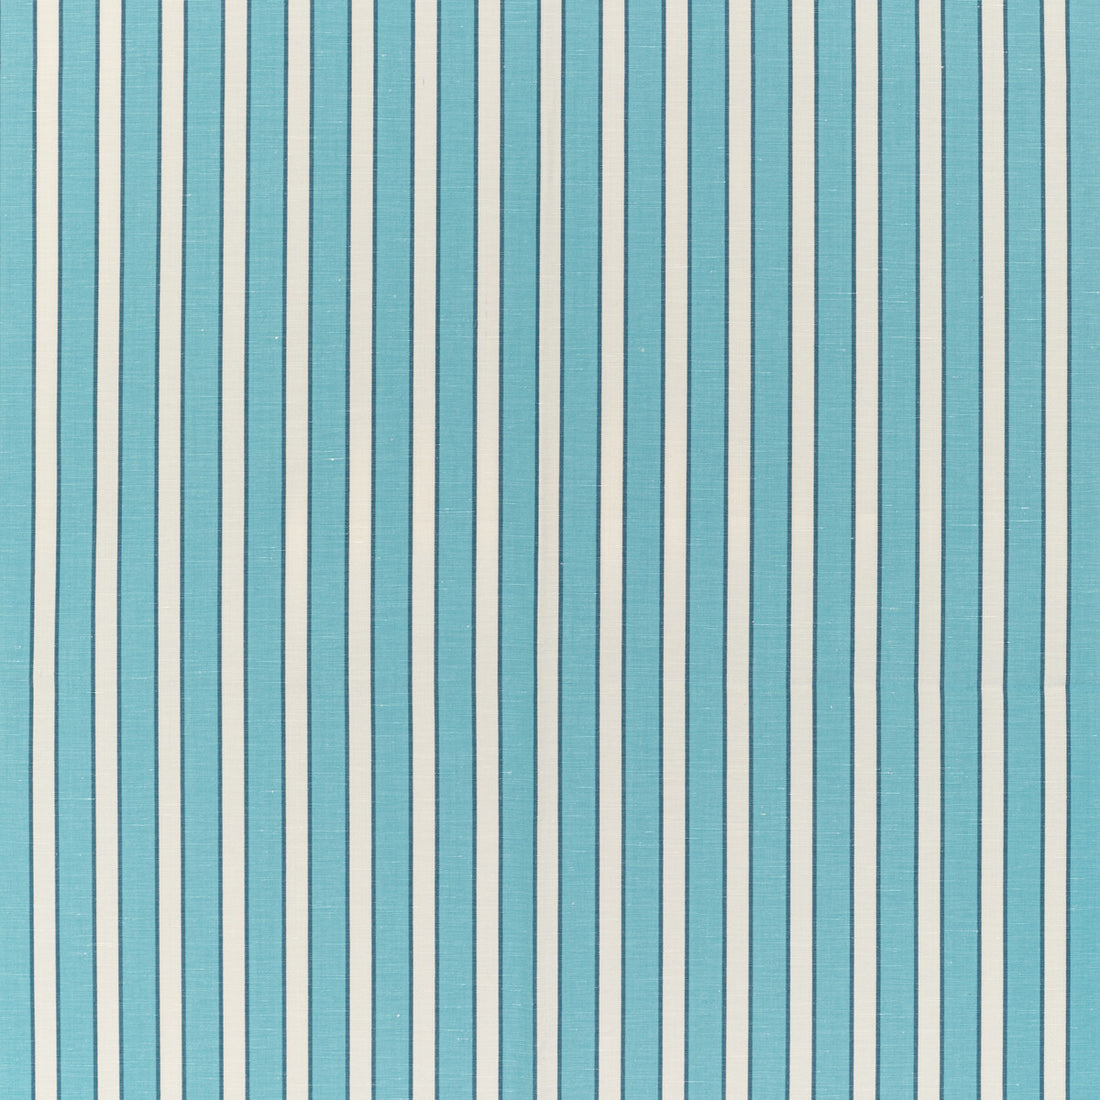 Rouen Stripe fabric in aqua color - pattern 8022117.535.0 - by Brunschwig &amp; Fils in the Normant Checks And Stripes II collection